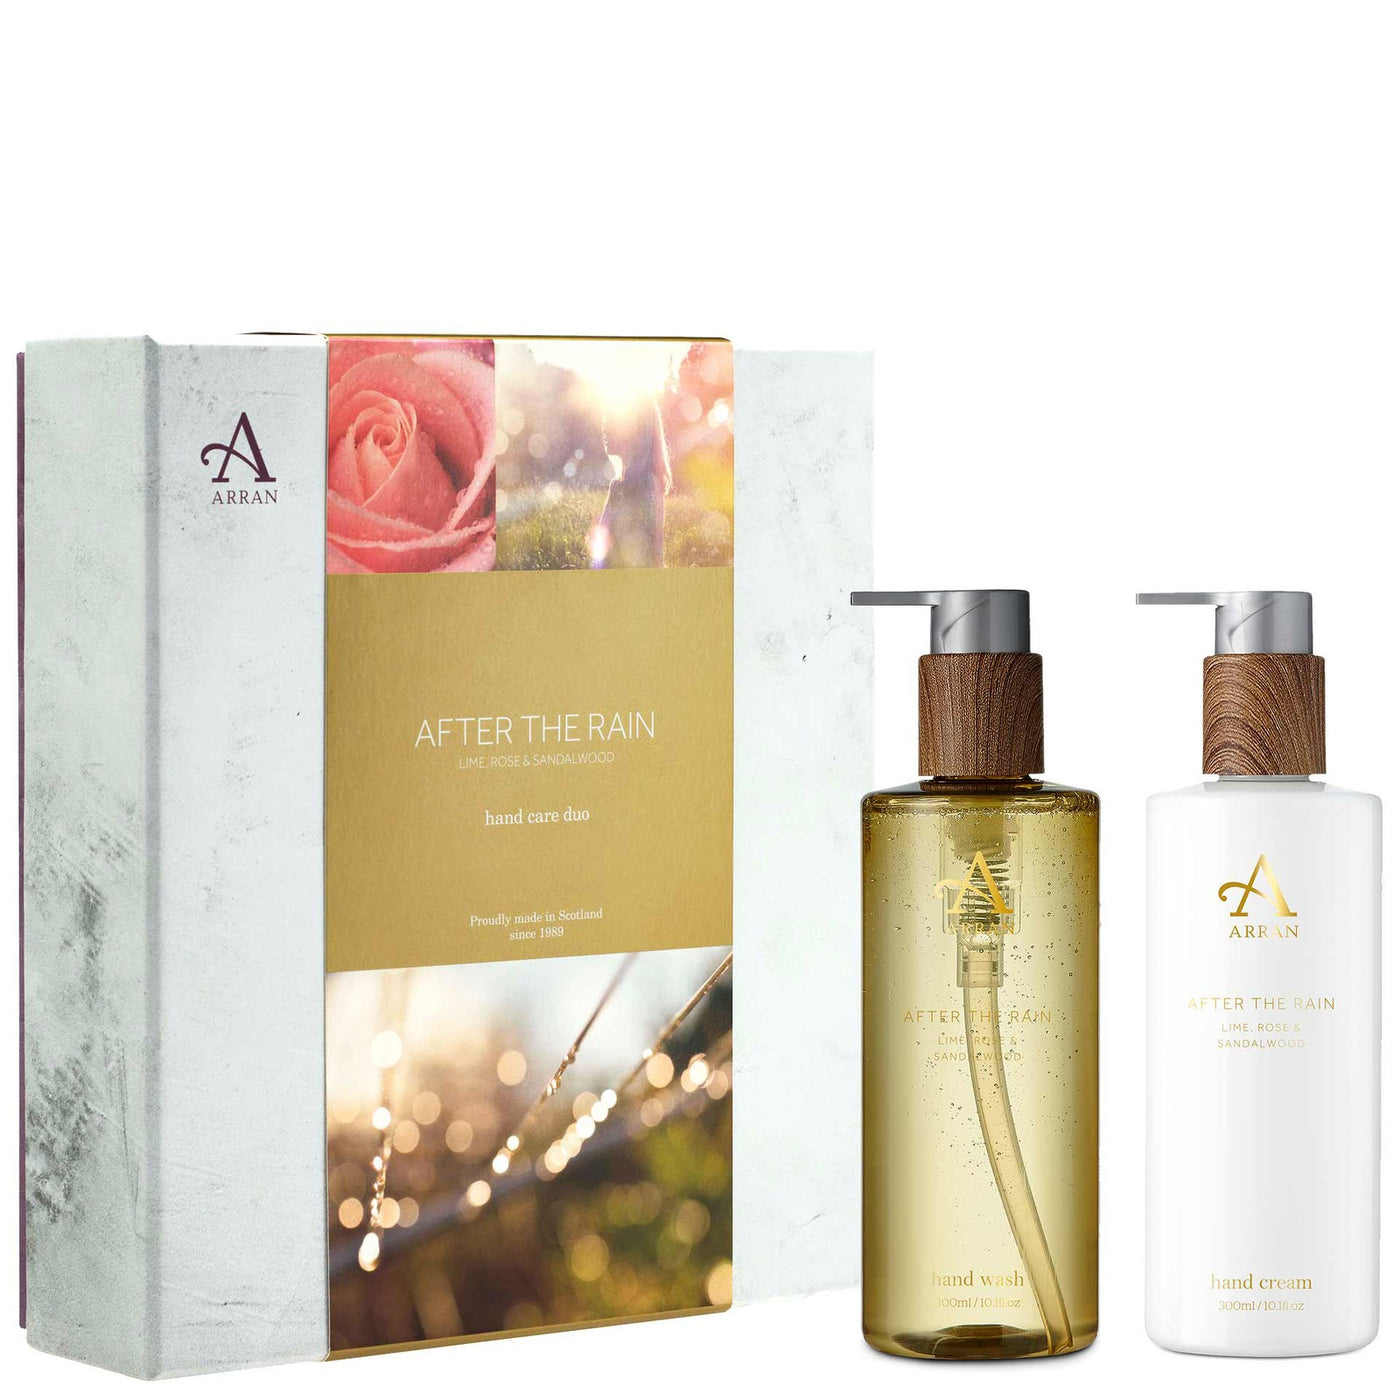 Arran After the Rain Hand Duo Gift Set